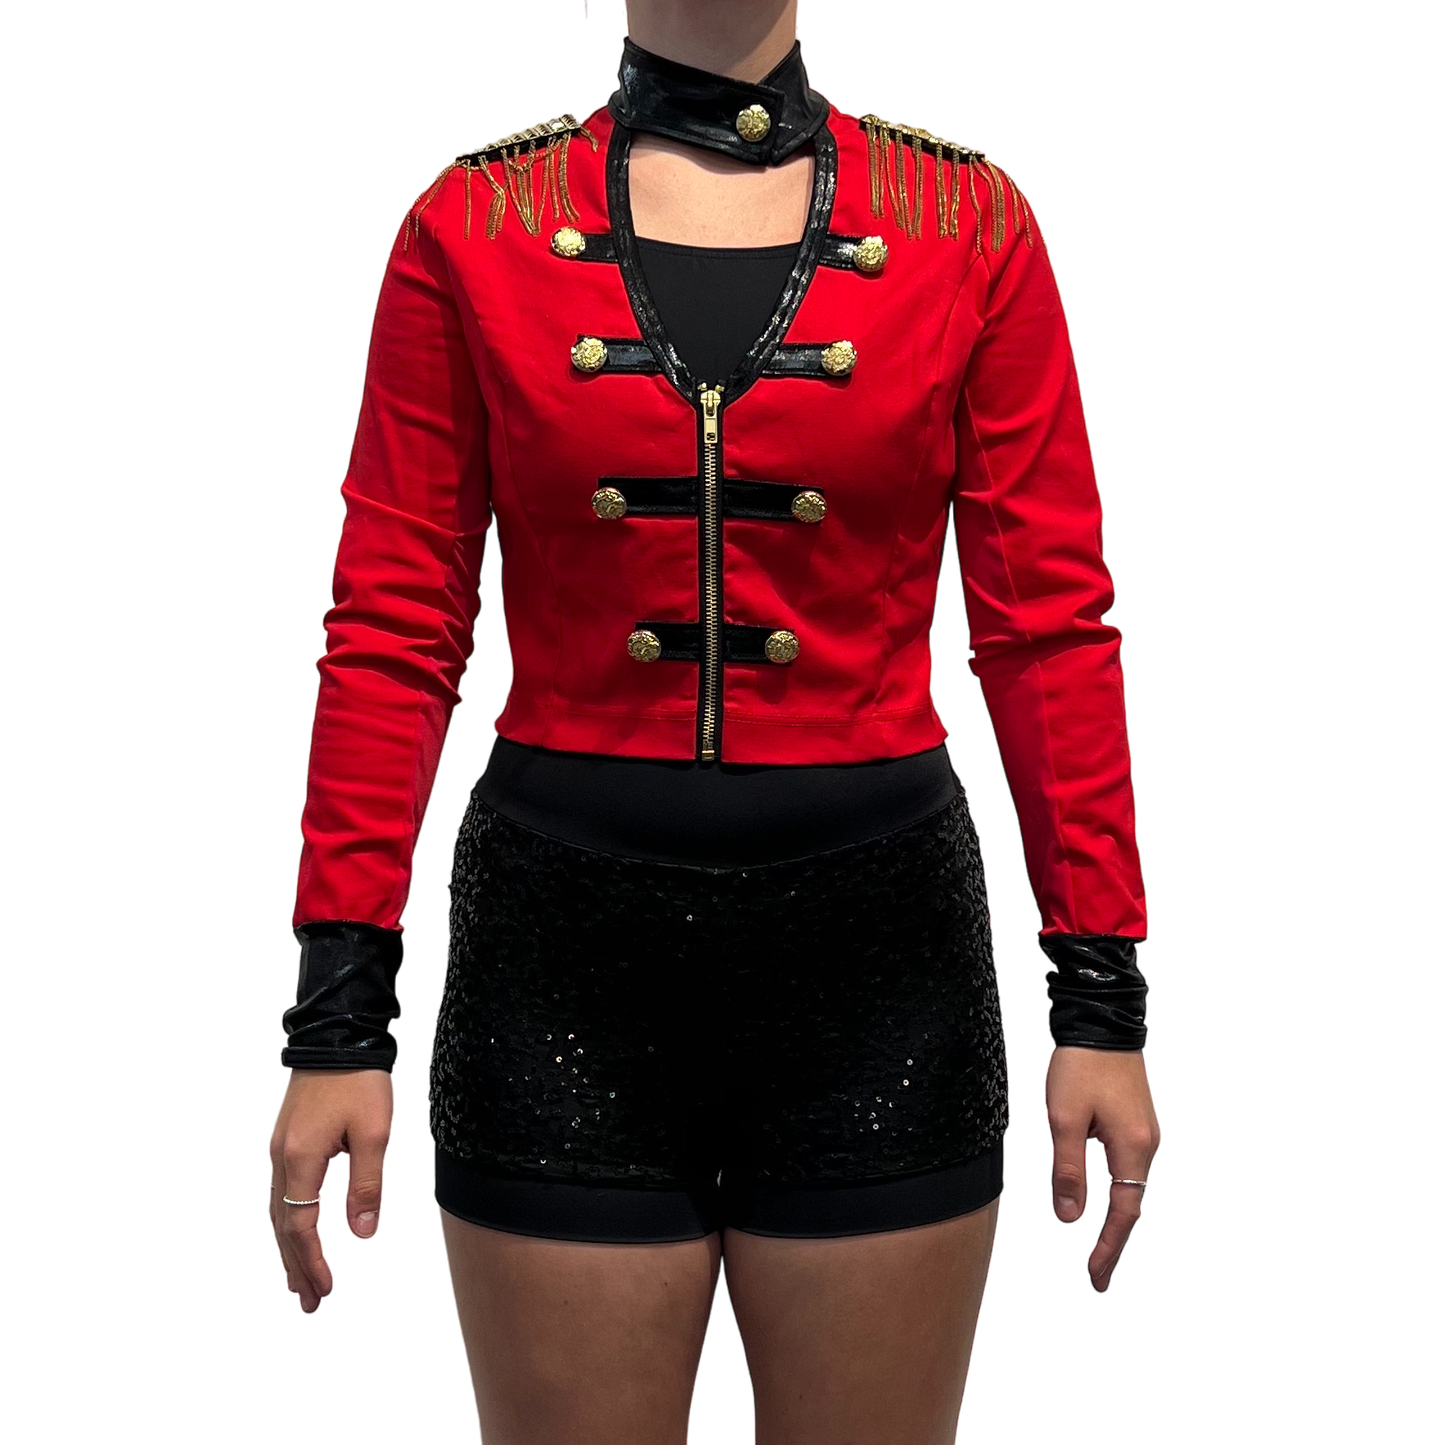 Red "London Outfit" Jazz Costume